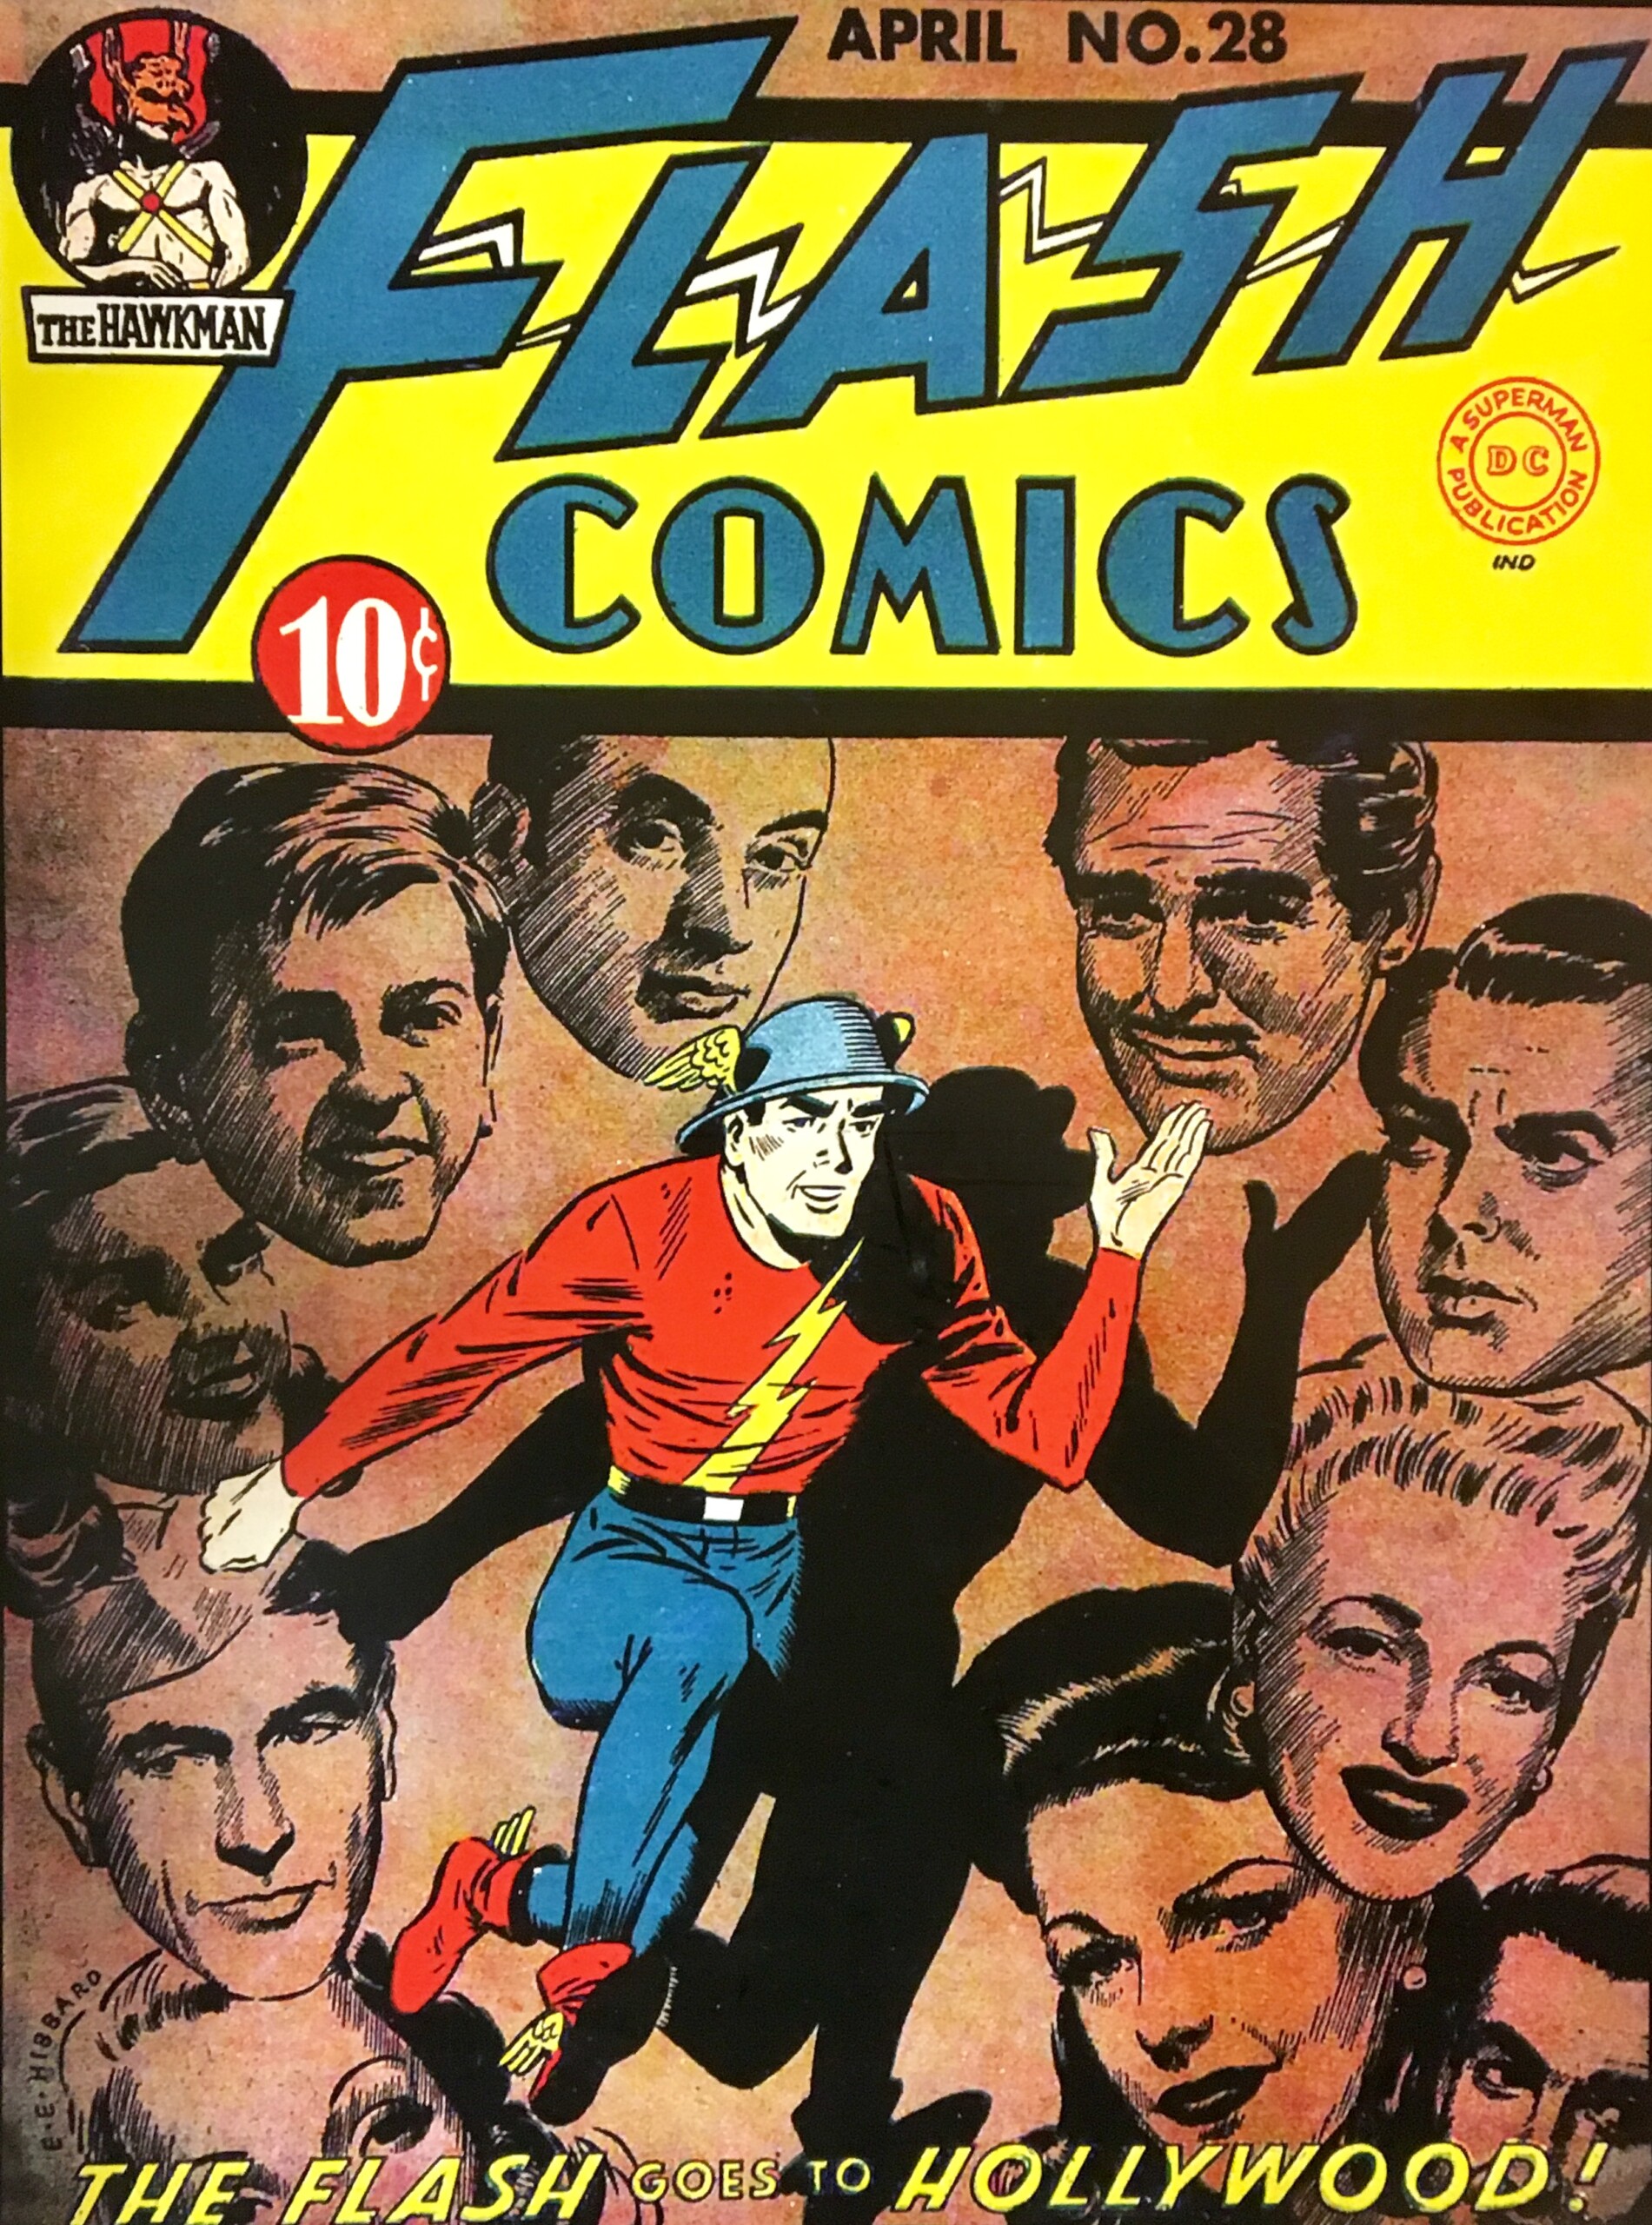 FLASHBACK – FRIDAY with who else?  THE FLASH!